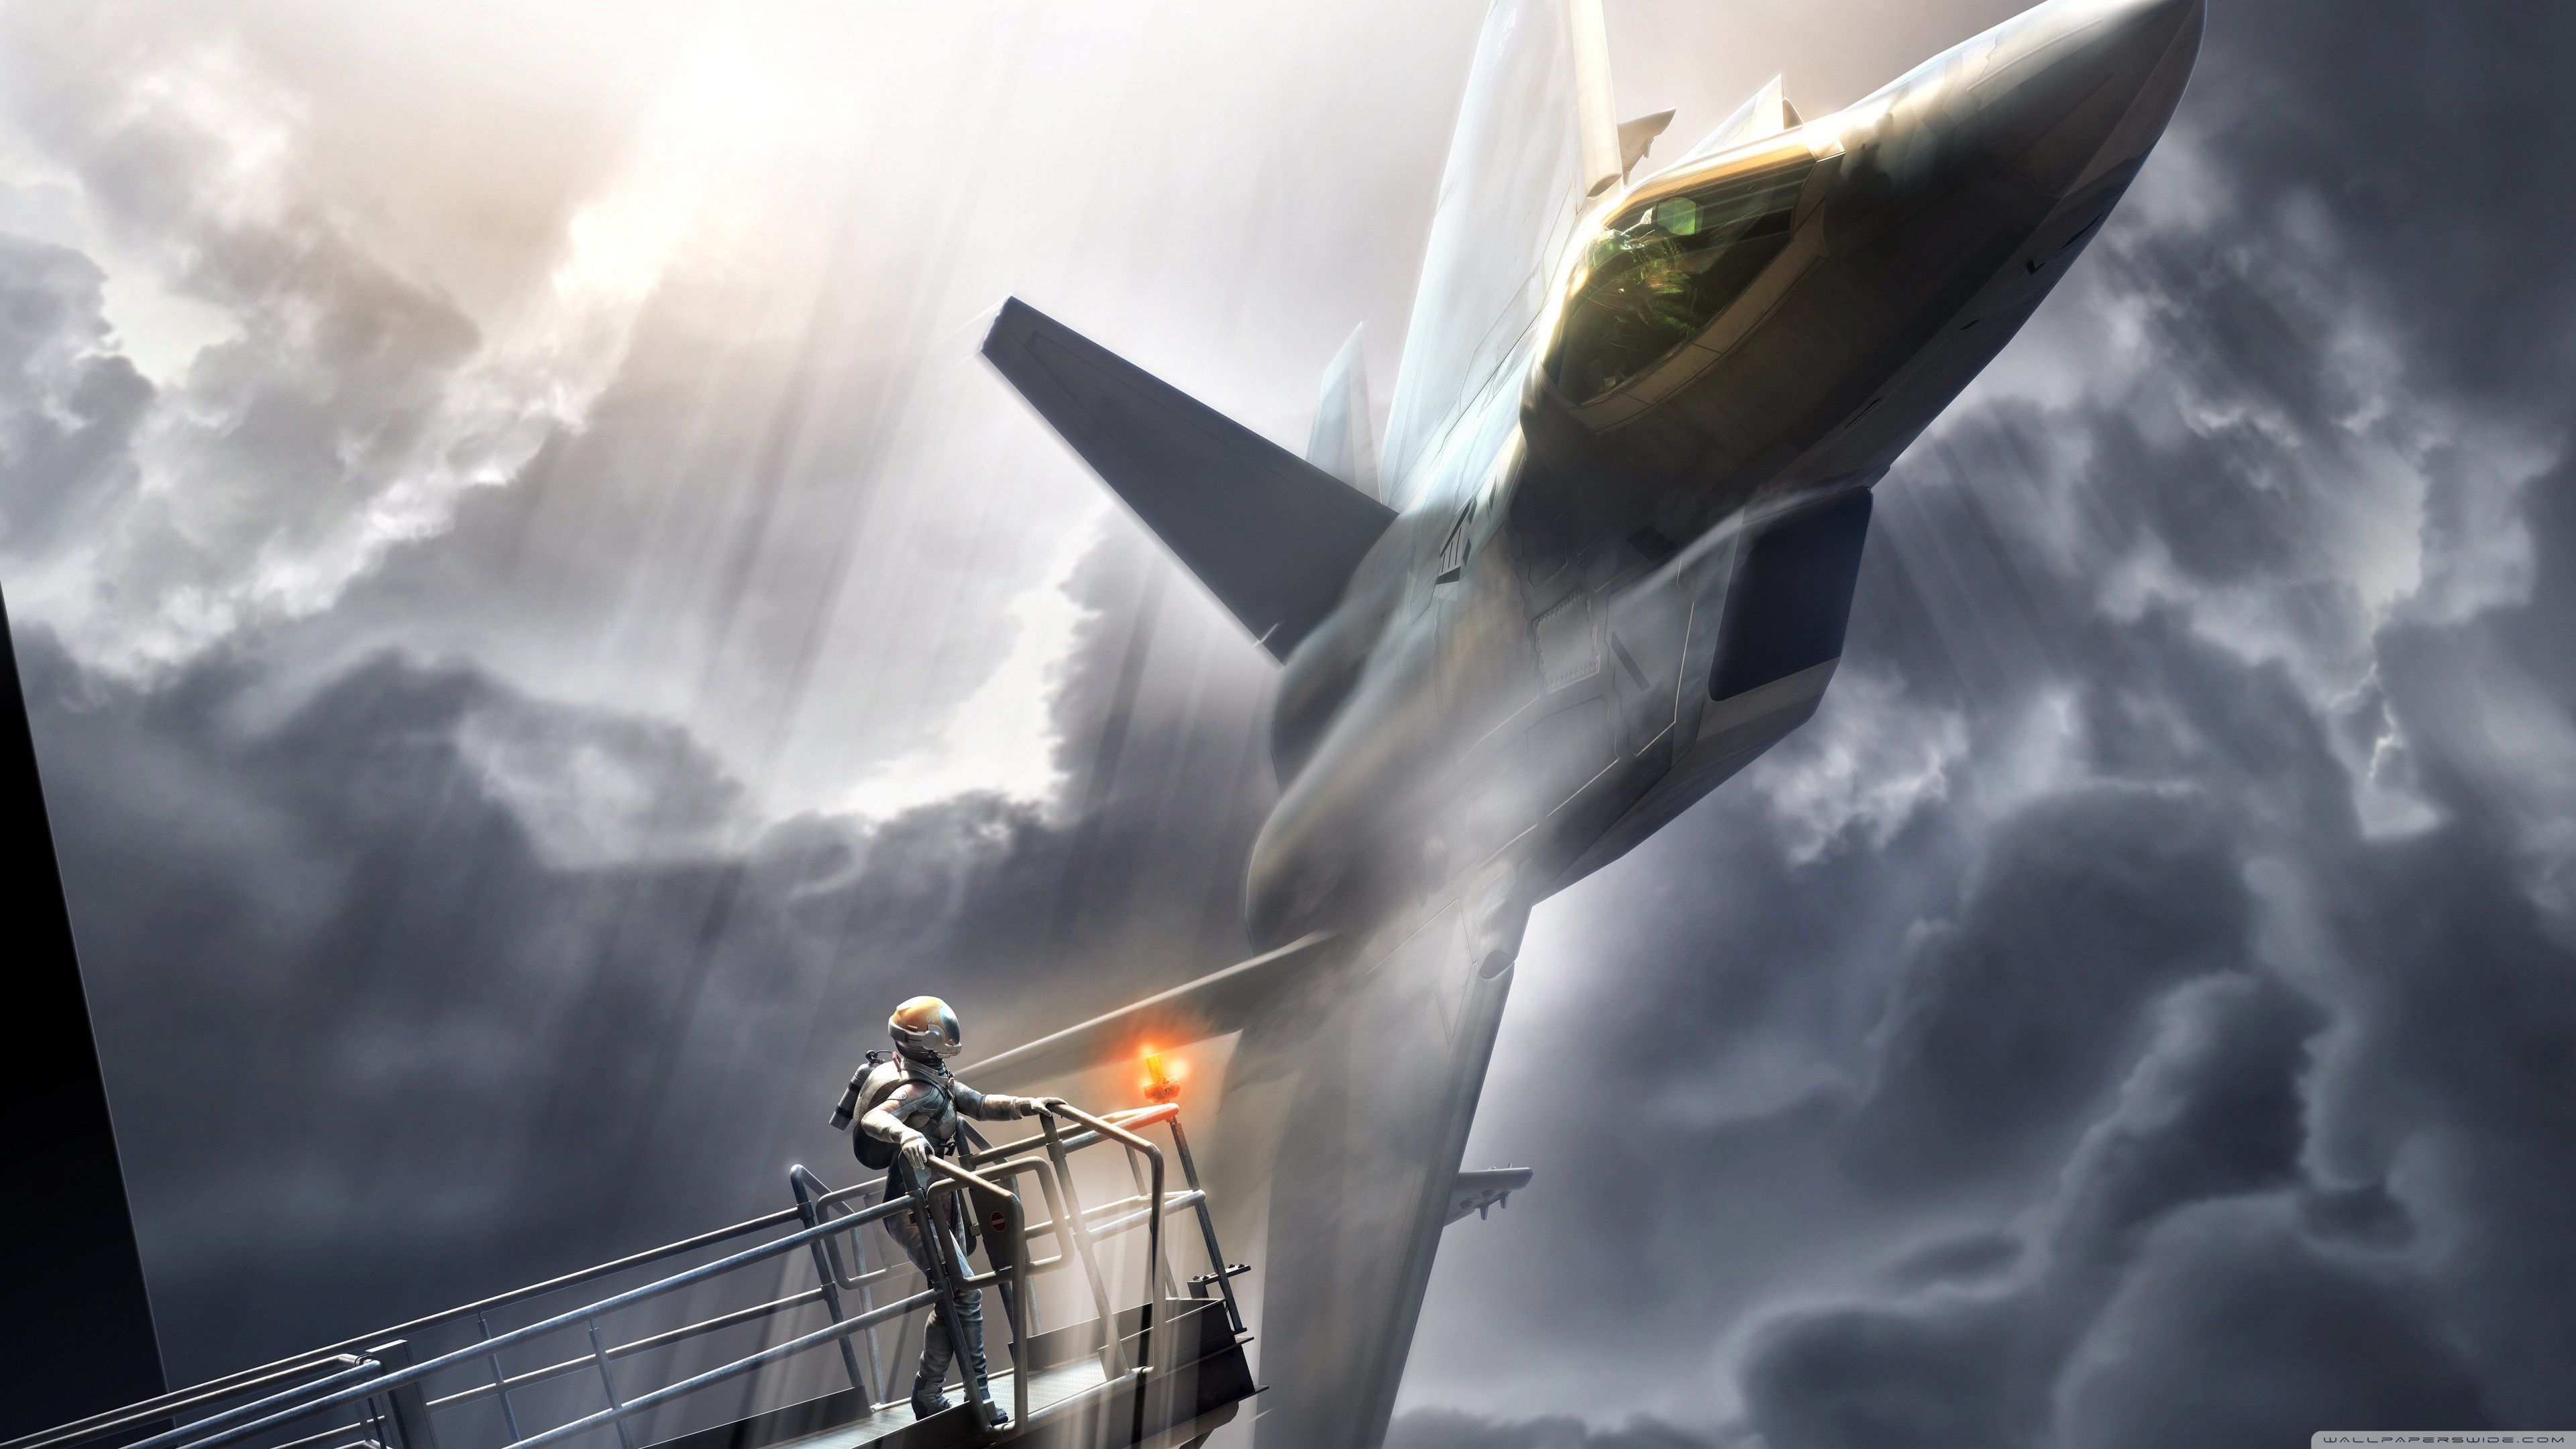 Ace Combat 7 Skies Unknown Ultra HD Desktop Backgrounds Wallpapers.